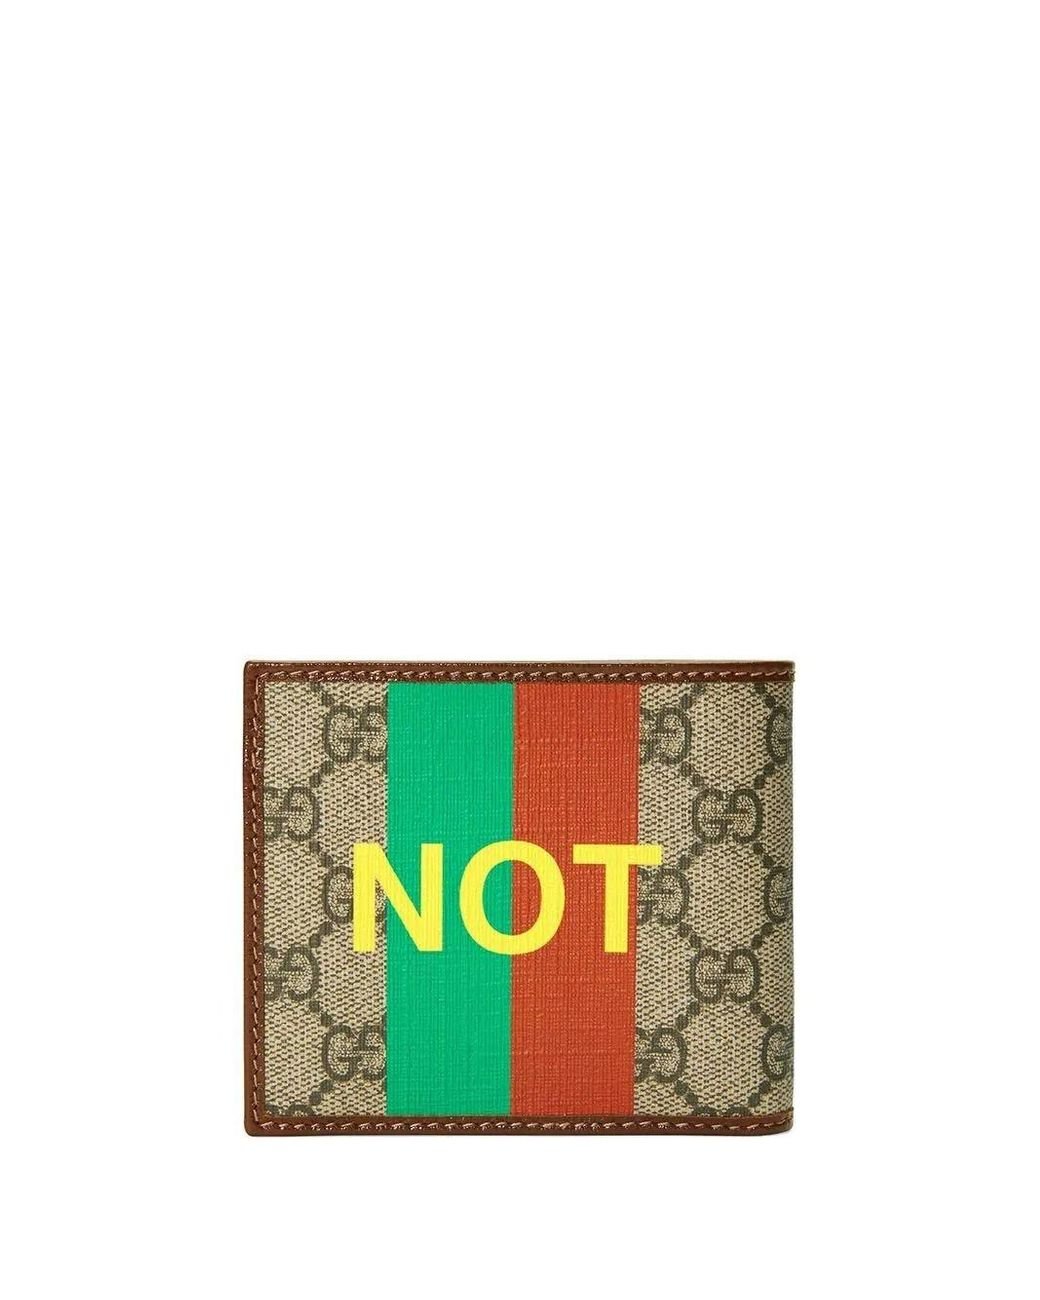 Gucci 'fake/not' Print Billfold Wallet in Natural for Men | Lyst